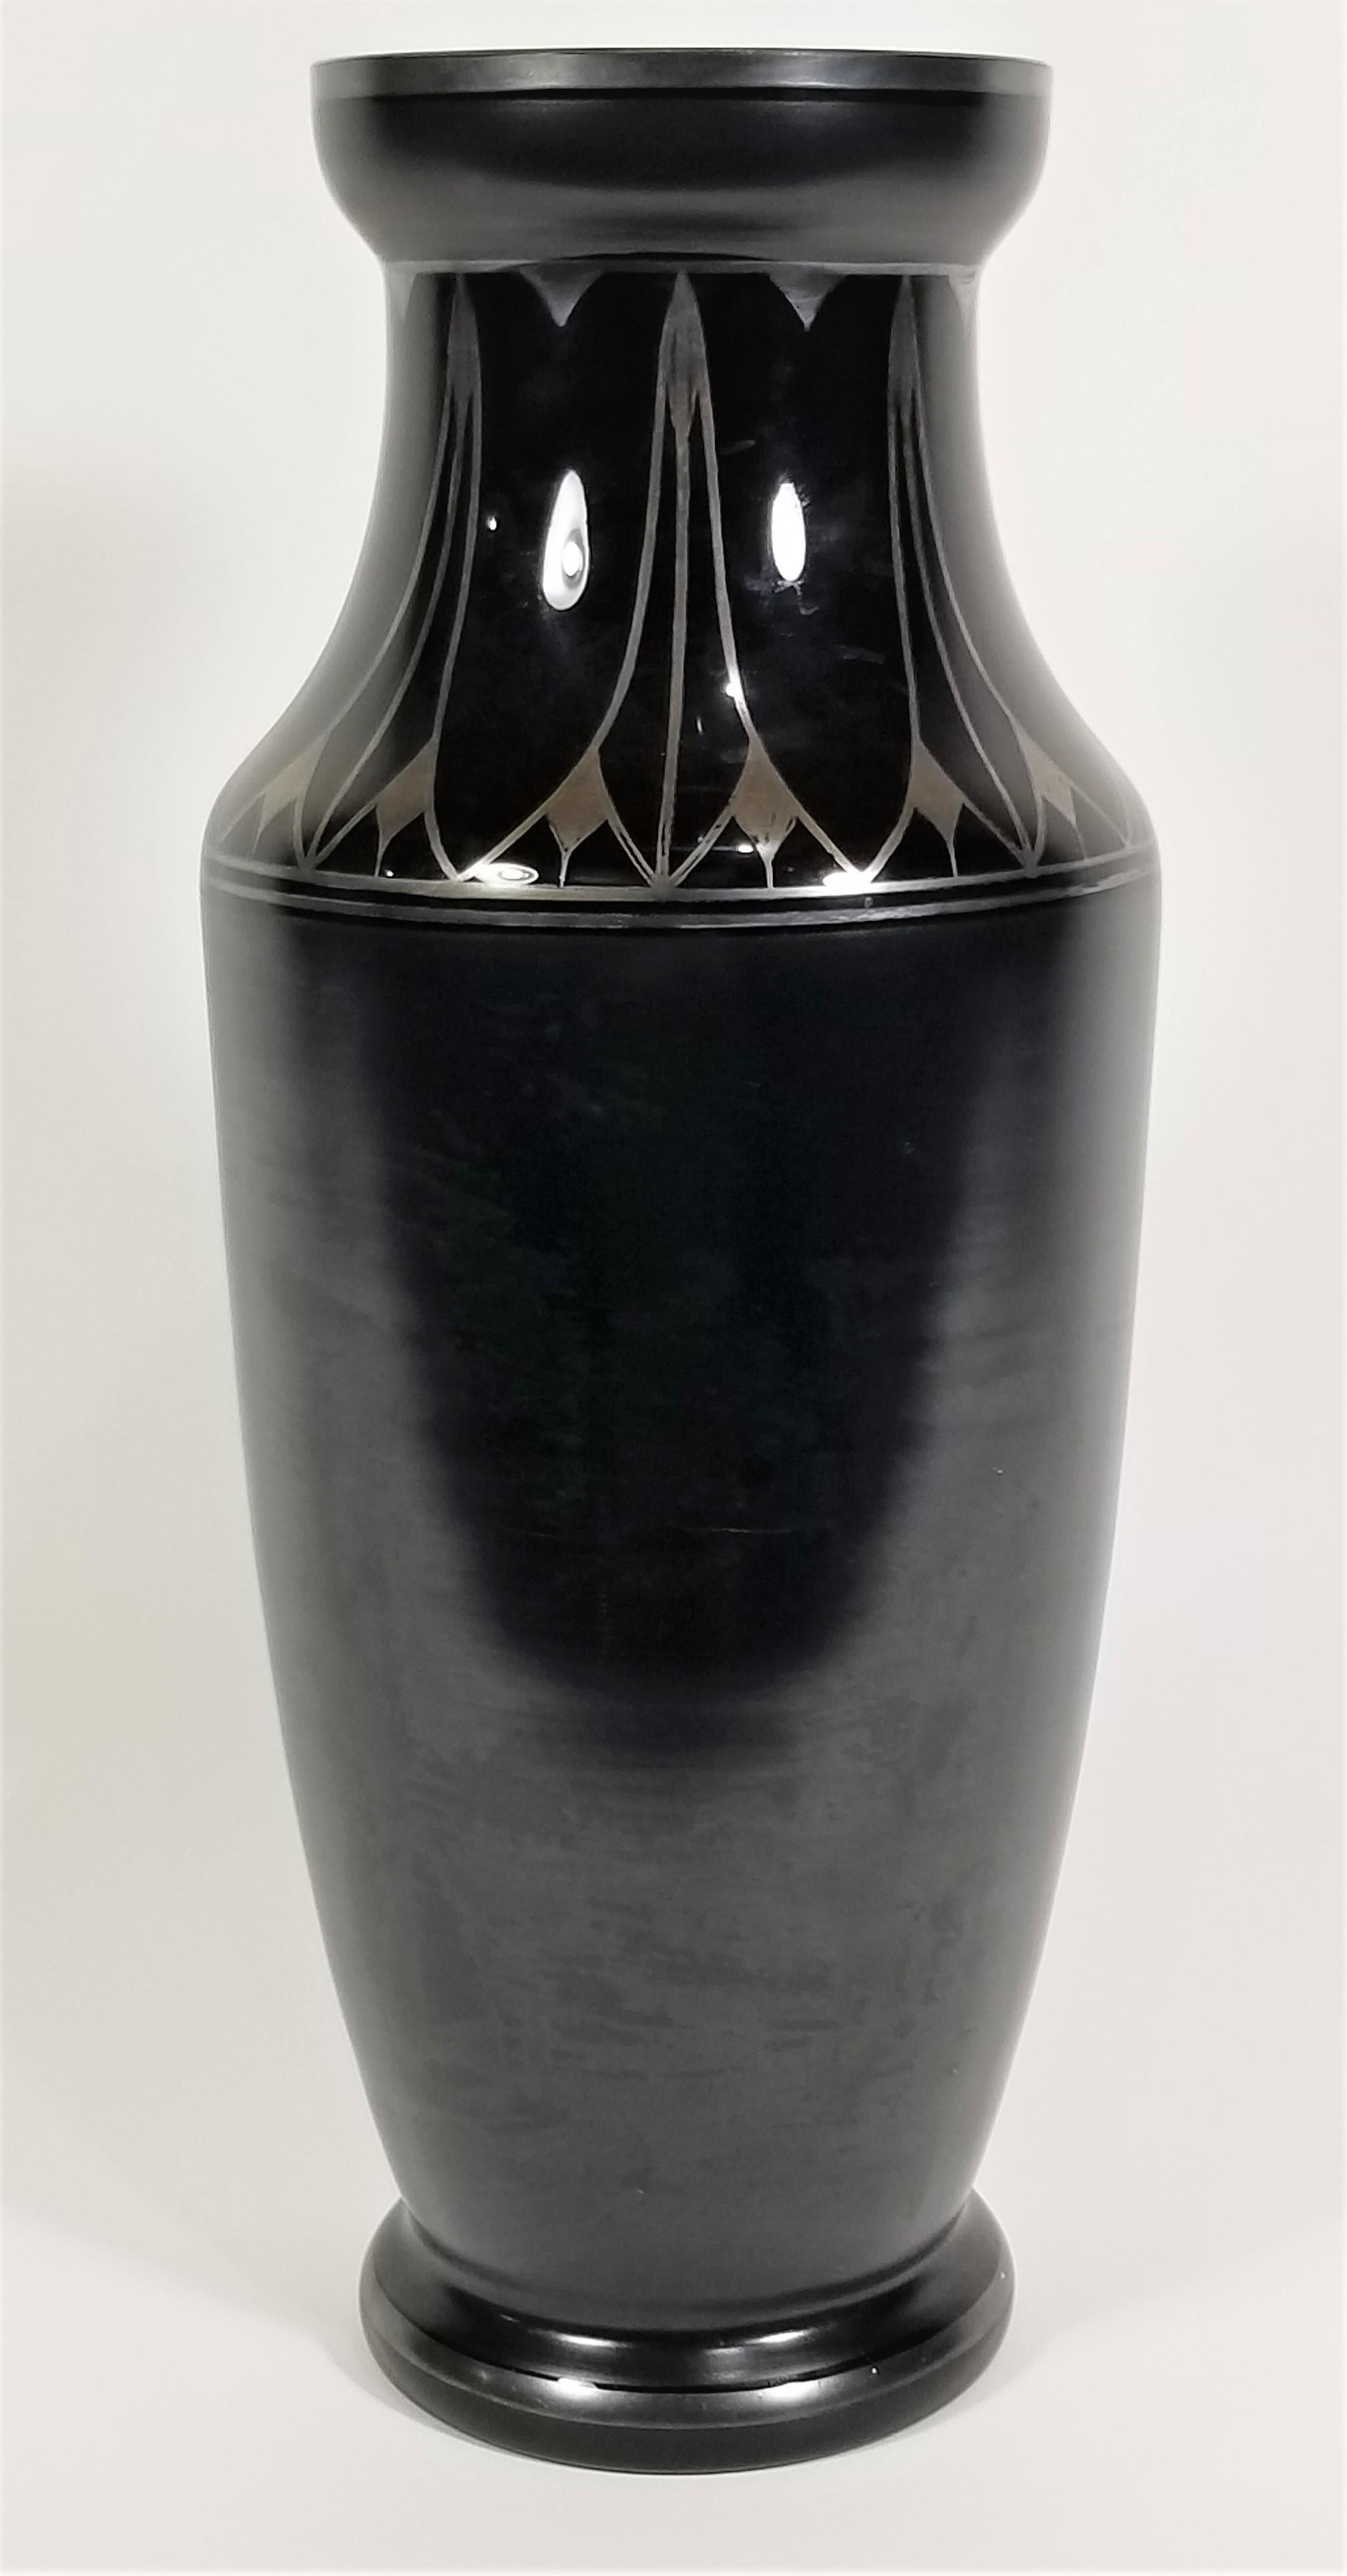 Art Deco black glass vase with silver inlay. Marked Czechoslovakia.

Measurements:
Height: 13.0 inches
Top Diameter: 3.88 inches
Middle Diameter: 5.13 inches.